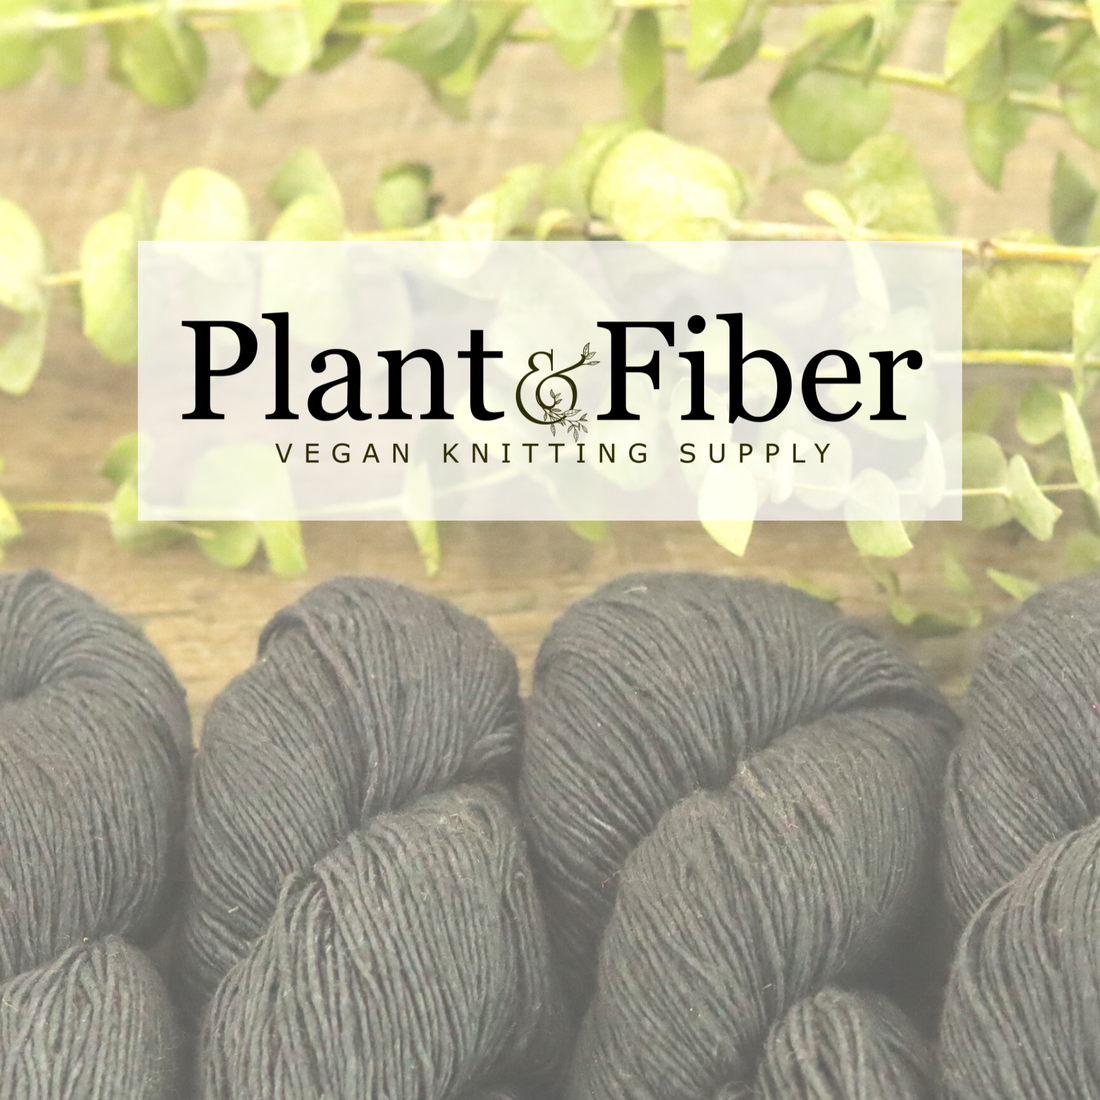 Welcome to the Plant & Fiber Blog: Knit With Plants.